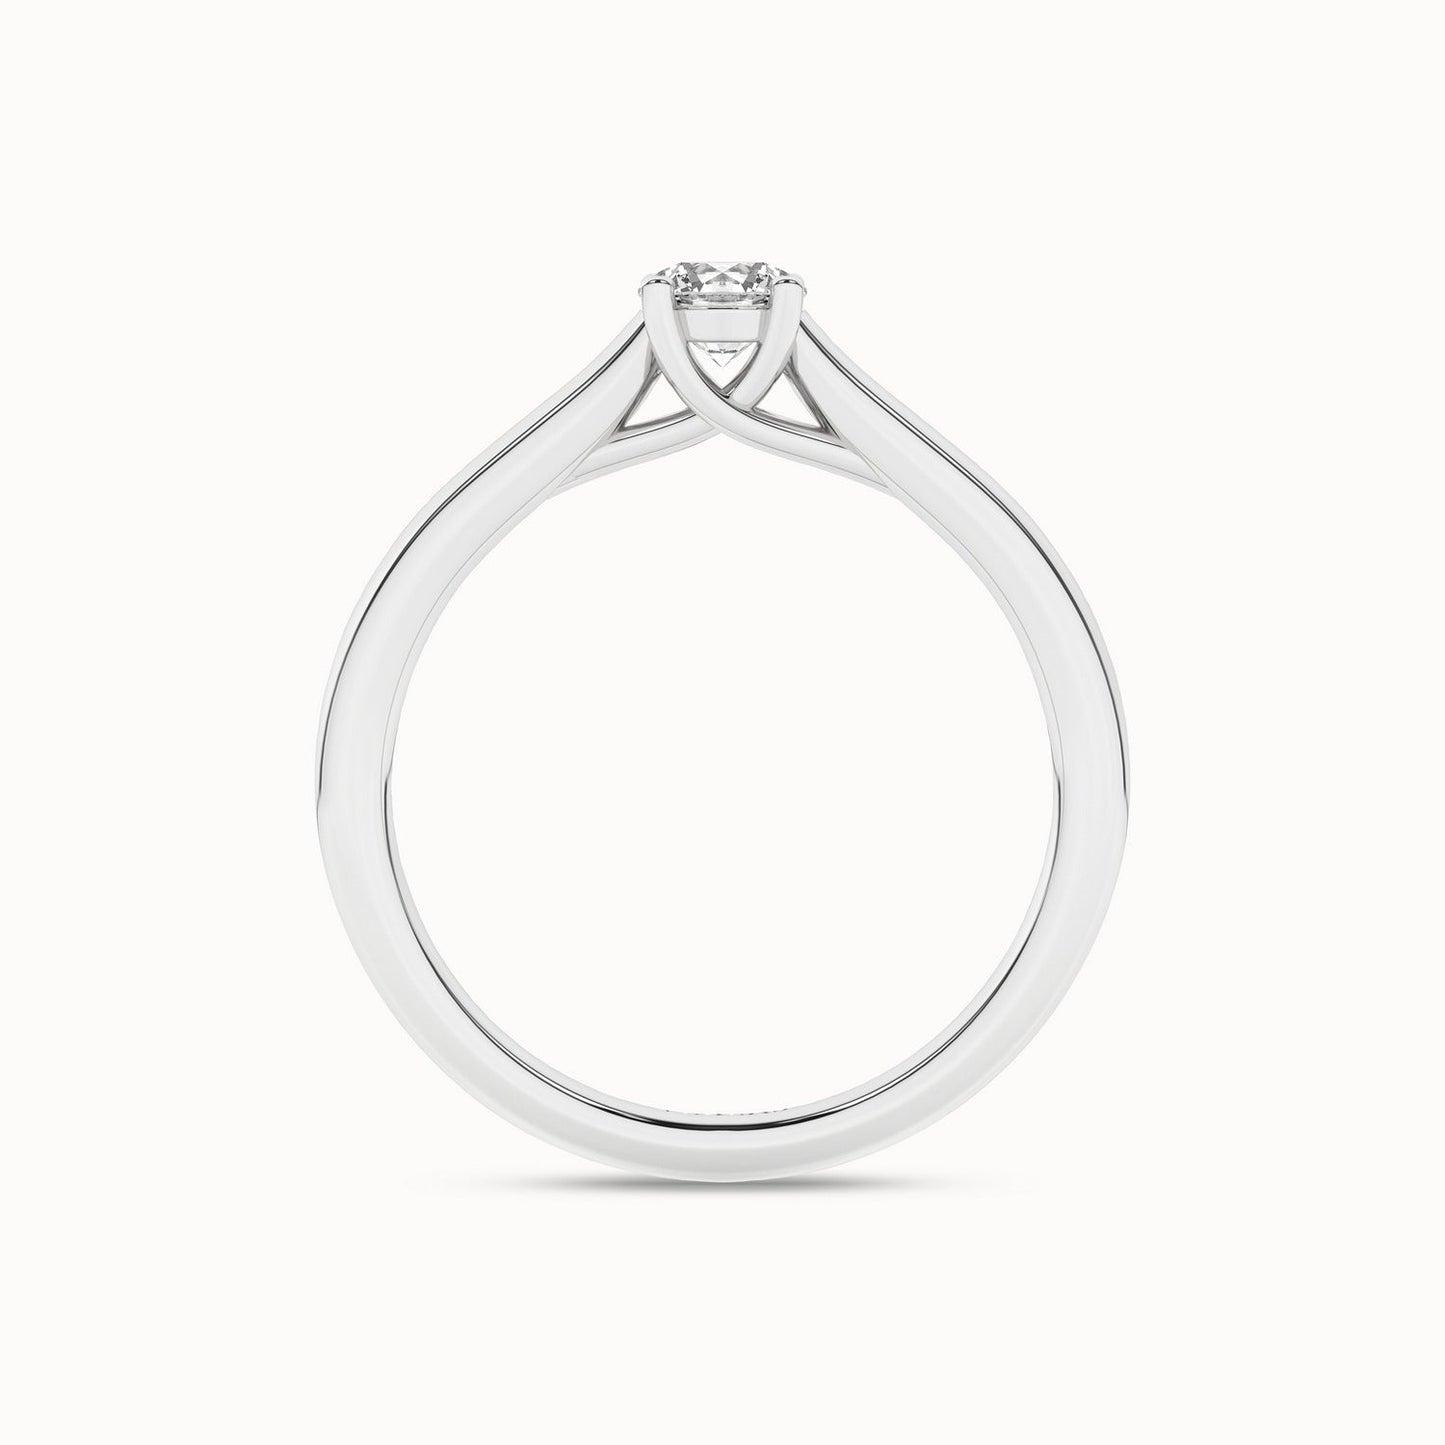 Timeless Round Ring_Product Angle_1/3Ct - 2